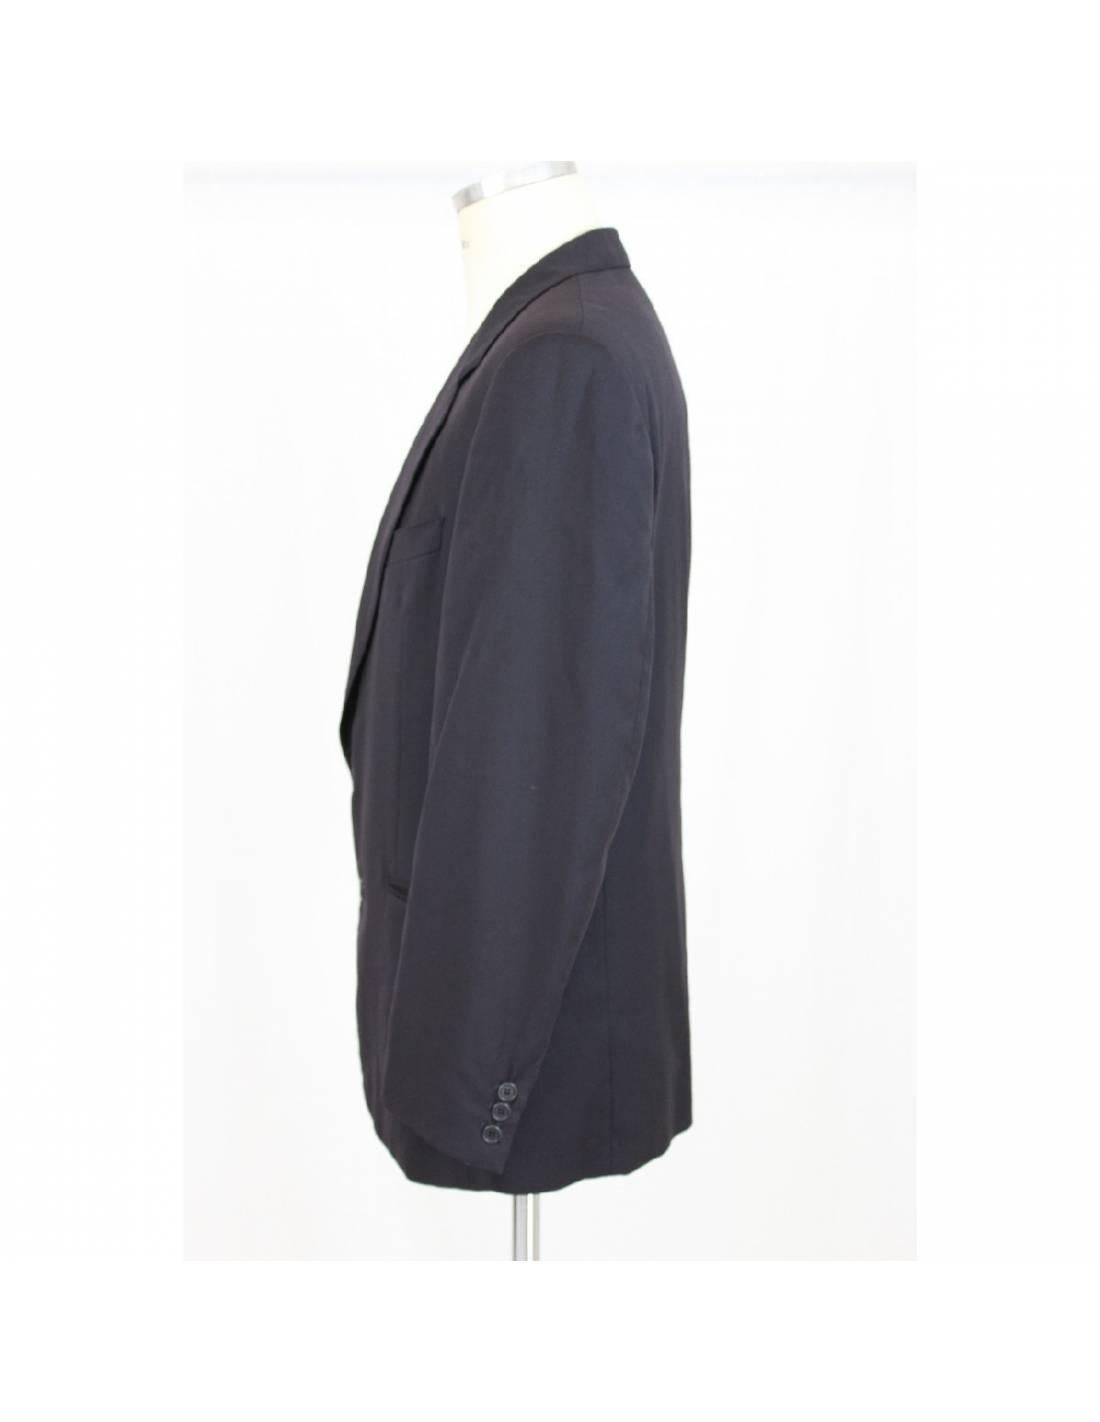 Gianfranco Ferre vintage jacket, blue color, two pockets on the sides and a chest pocket, 100% wool.

Size: 50 It 40 Us 40 Uk

Shoulder: 50 cm
Bust / Chest: 54 cm
Sleeve: 62 cm
Length: 84 cm
Composition: 100% wool
Blue color
Conditions: excellent